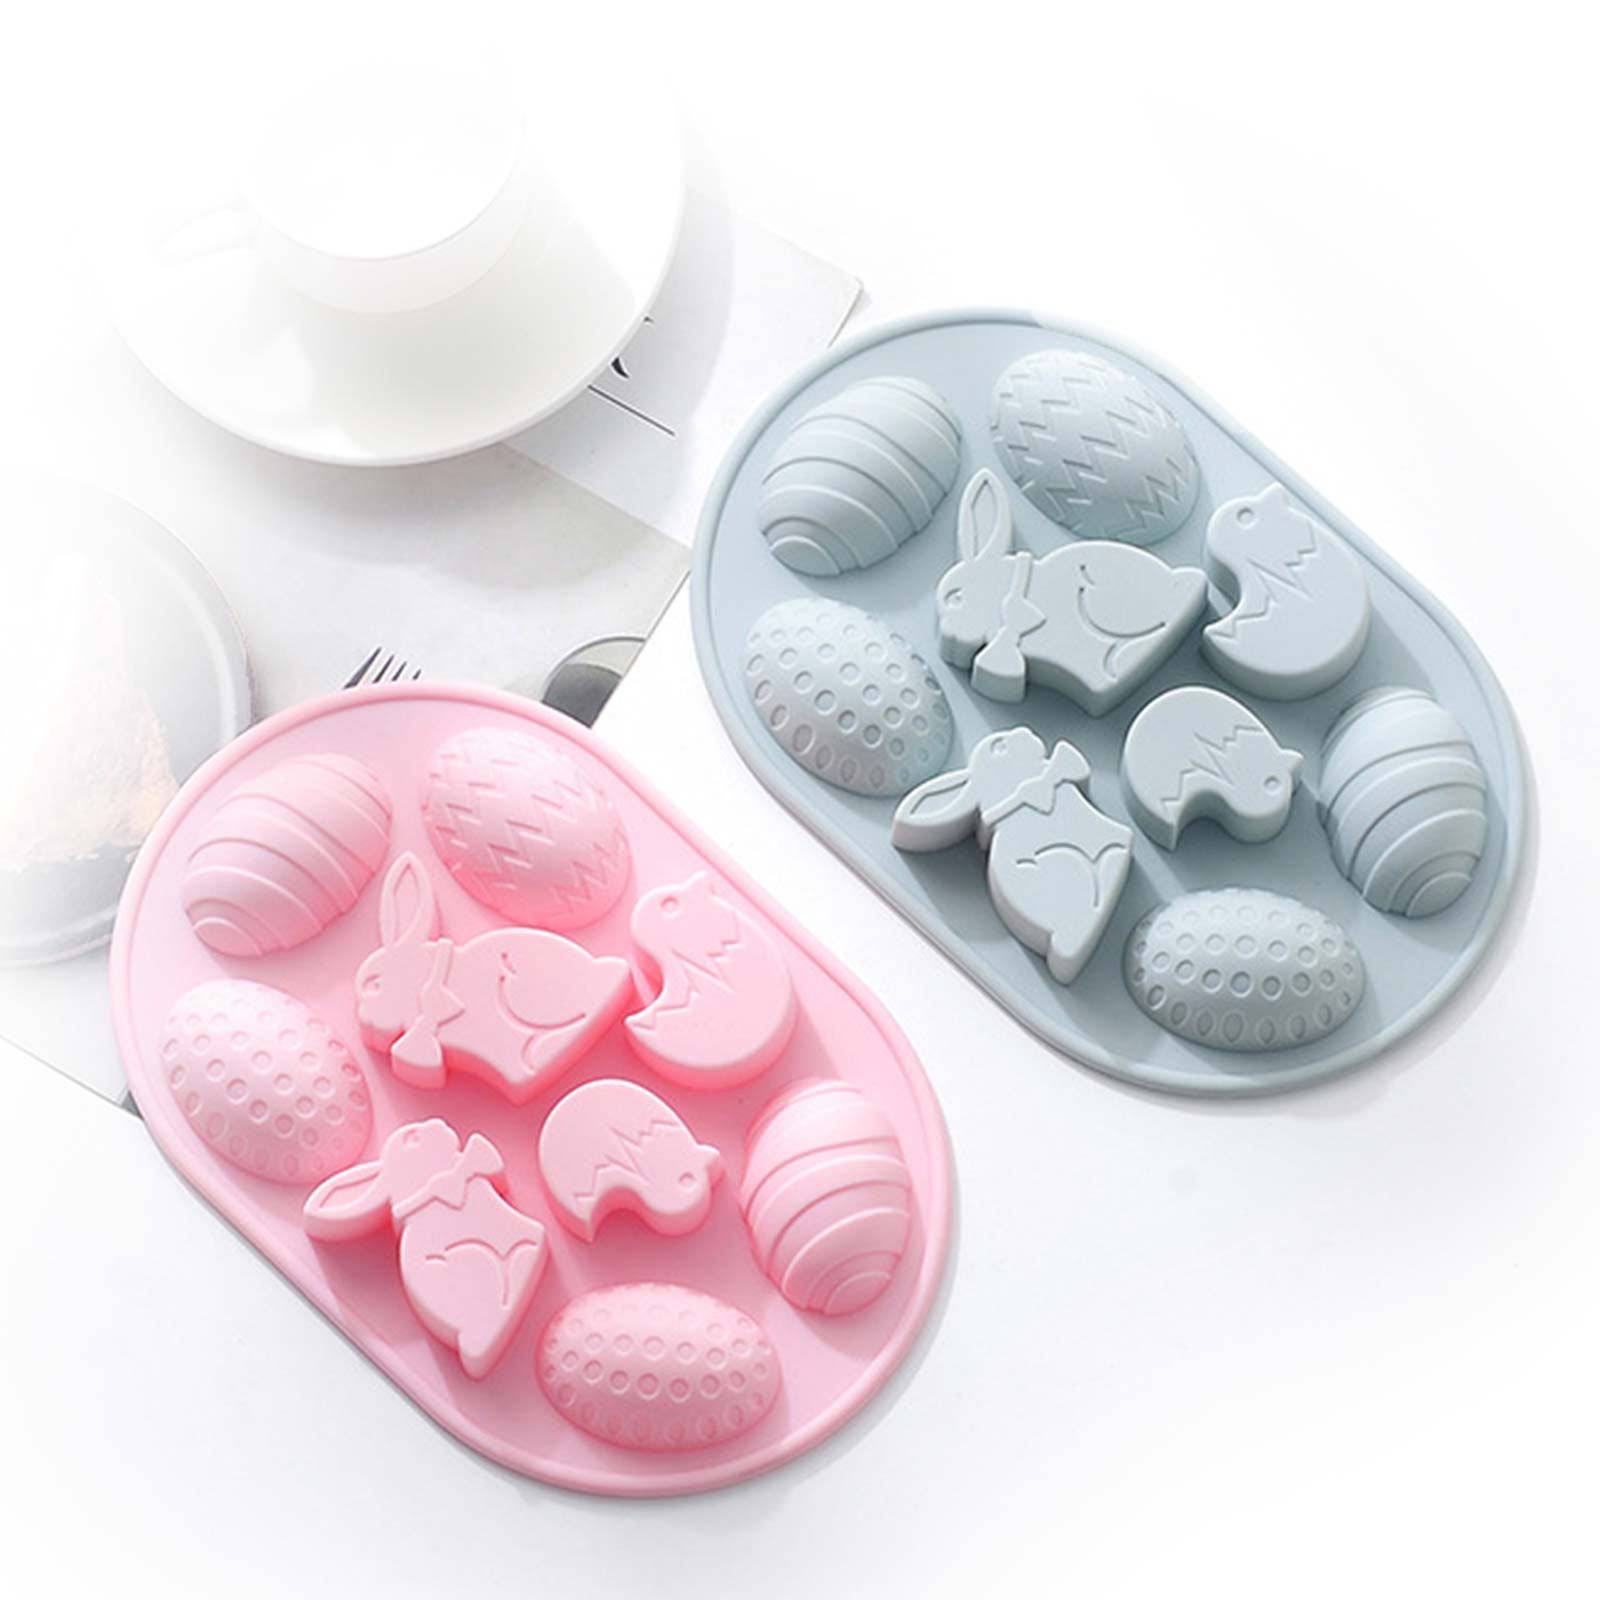 3D Animal Shaped Silicone Mold